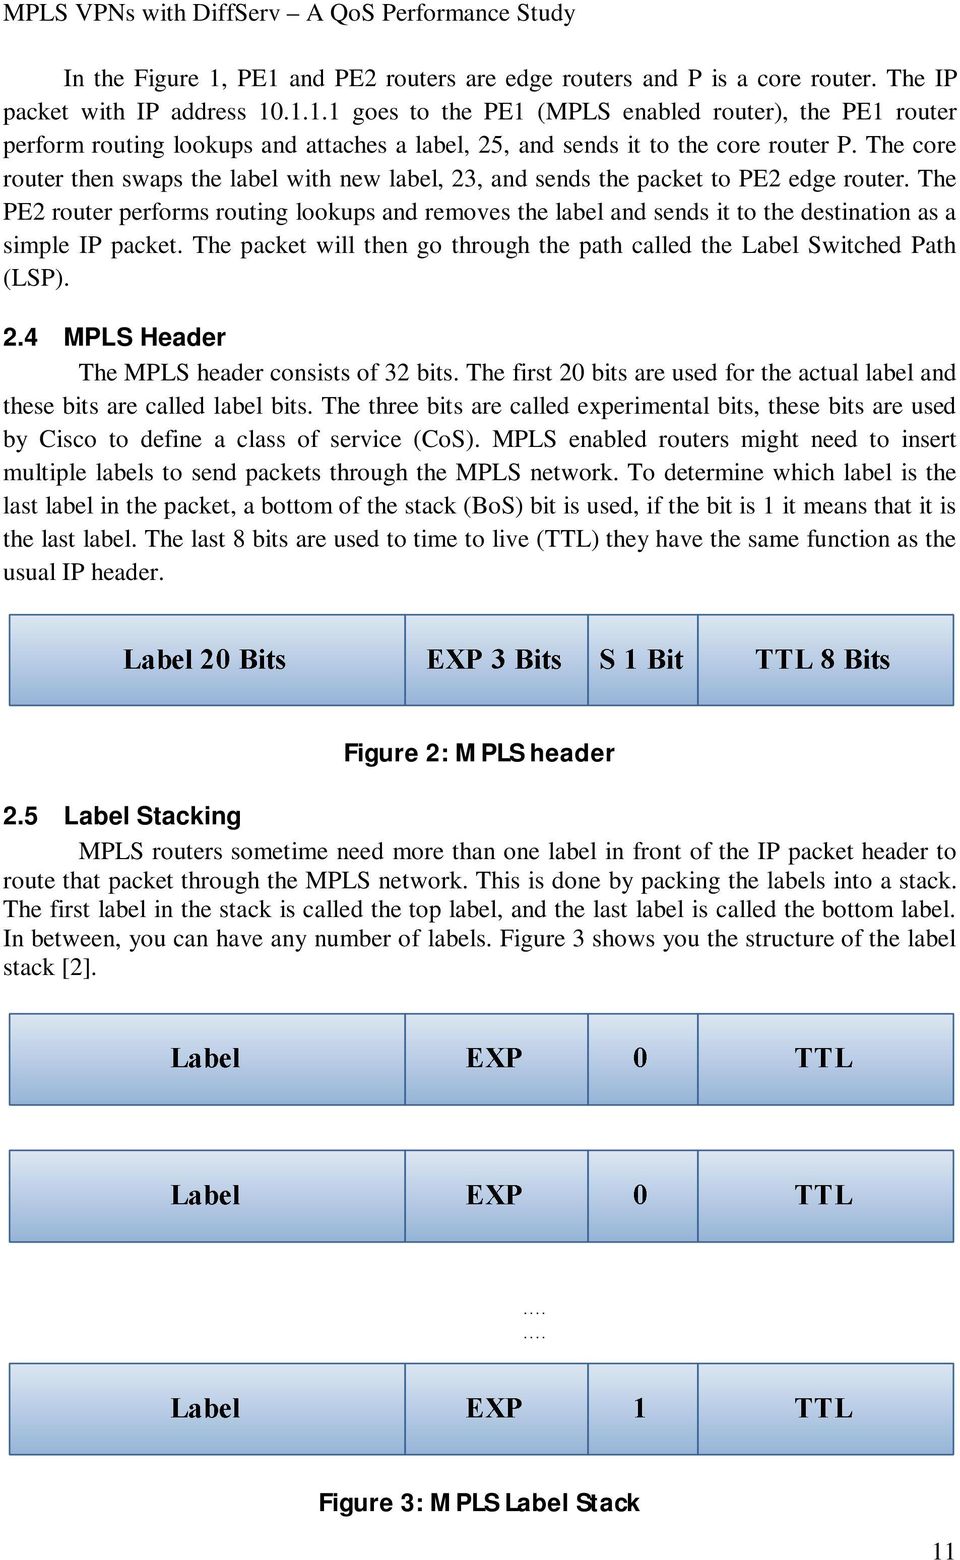 The PE2 router performs routing lookups and removes the label and sends it to the destination as a simple IP packet. The packet will then go through the path called the Label Switched Path (LSP). 2.